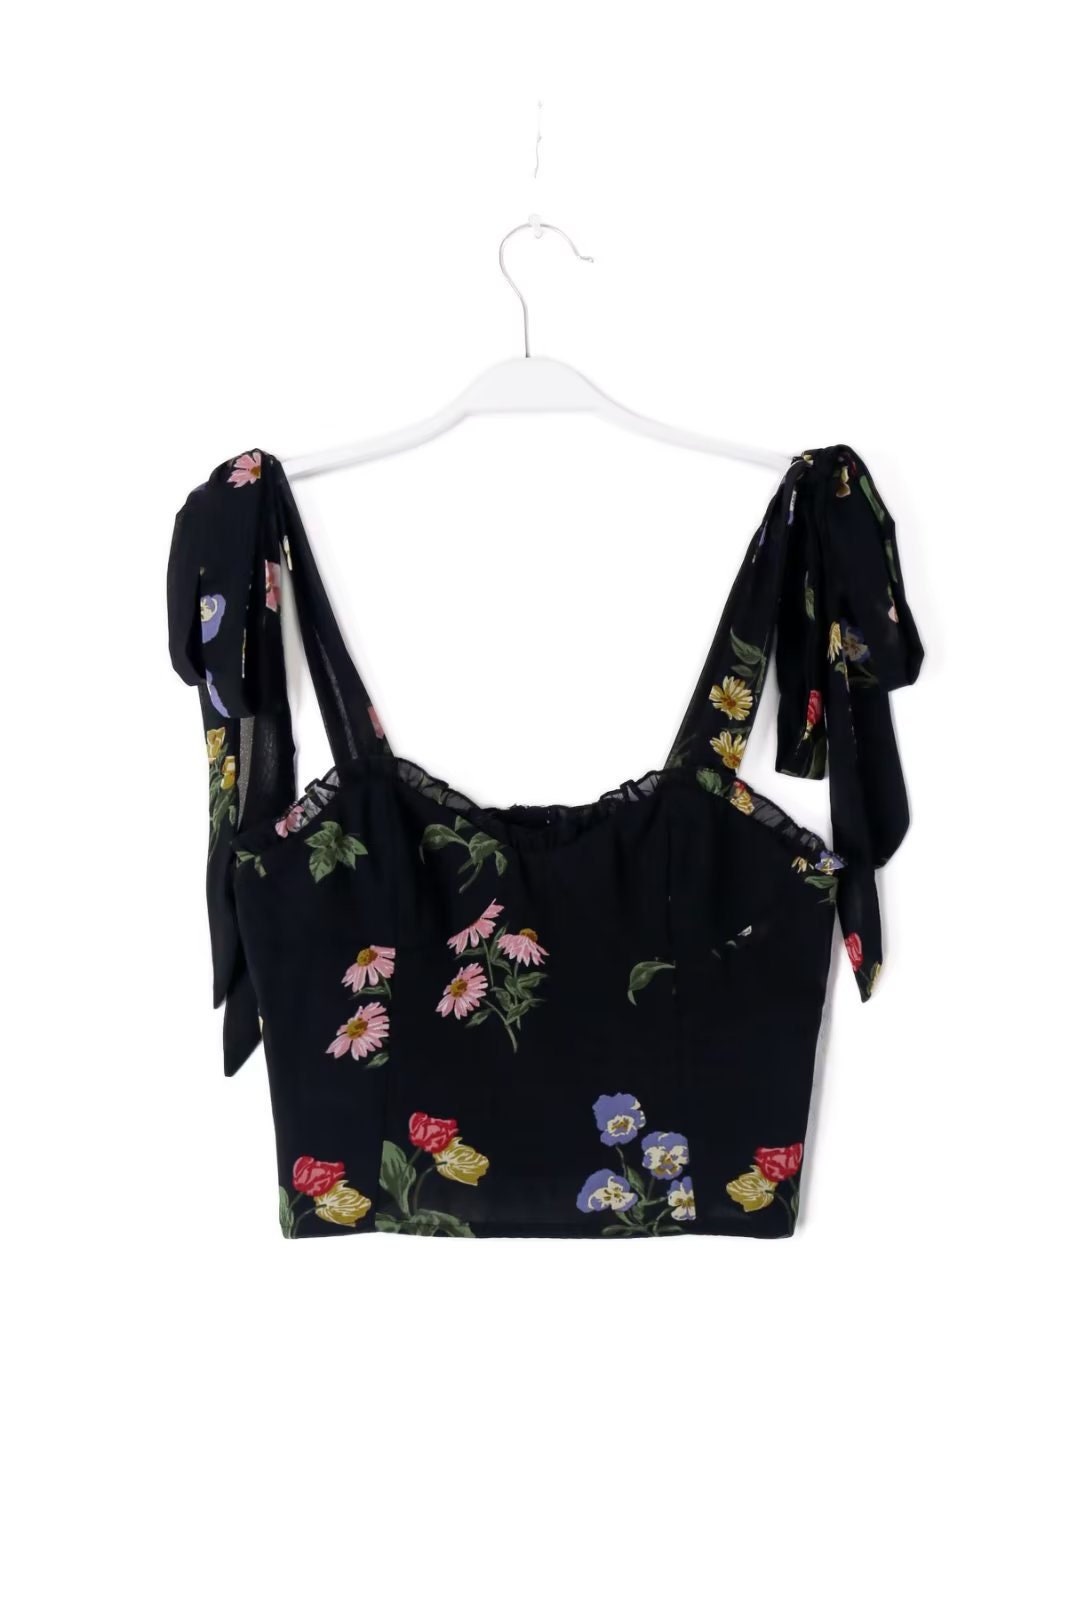 Retro Black Flower Print Bow Strap Camis, Goblincore Aesthetic, Women Ruched Chest Short Tank Top, Sexy Slim Floral Crop Top